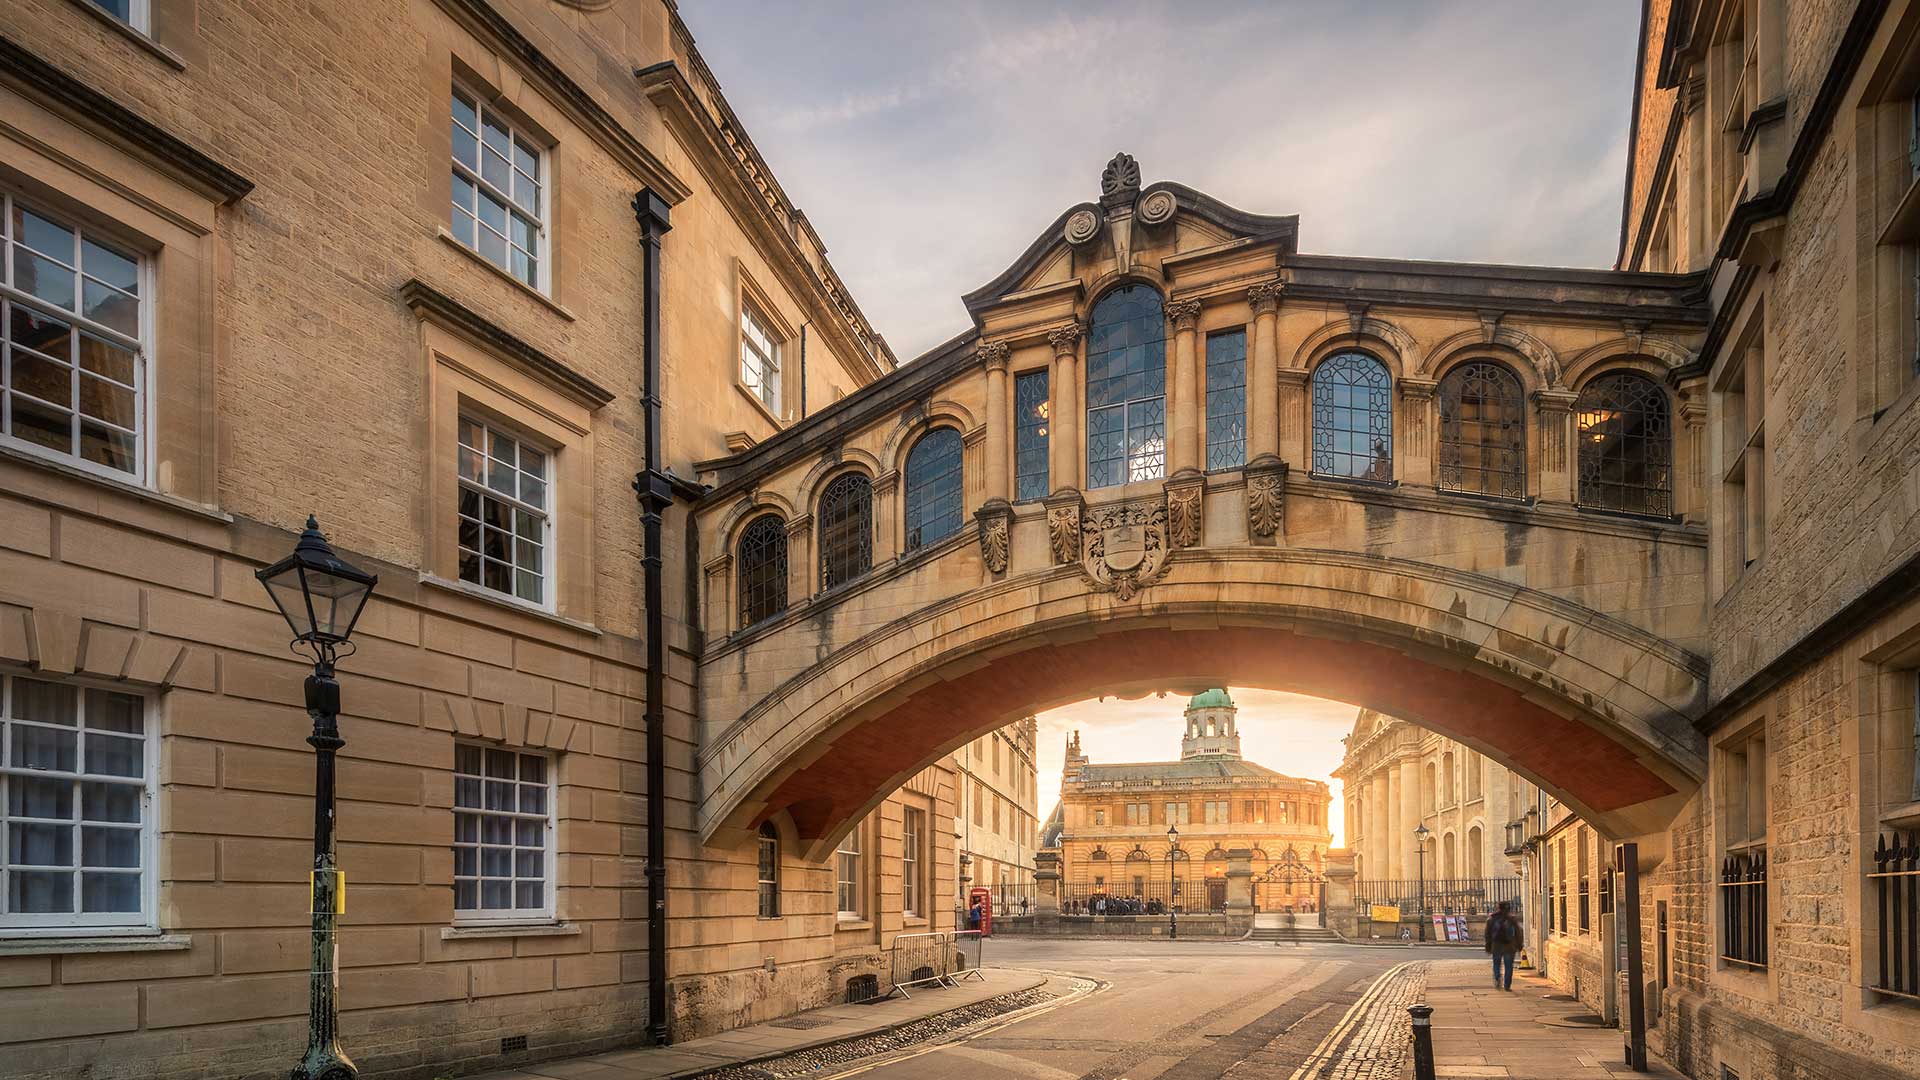 The quaint and charming Bridge of Sighs in Oxford